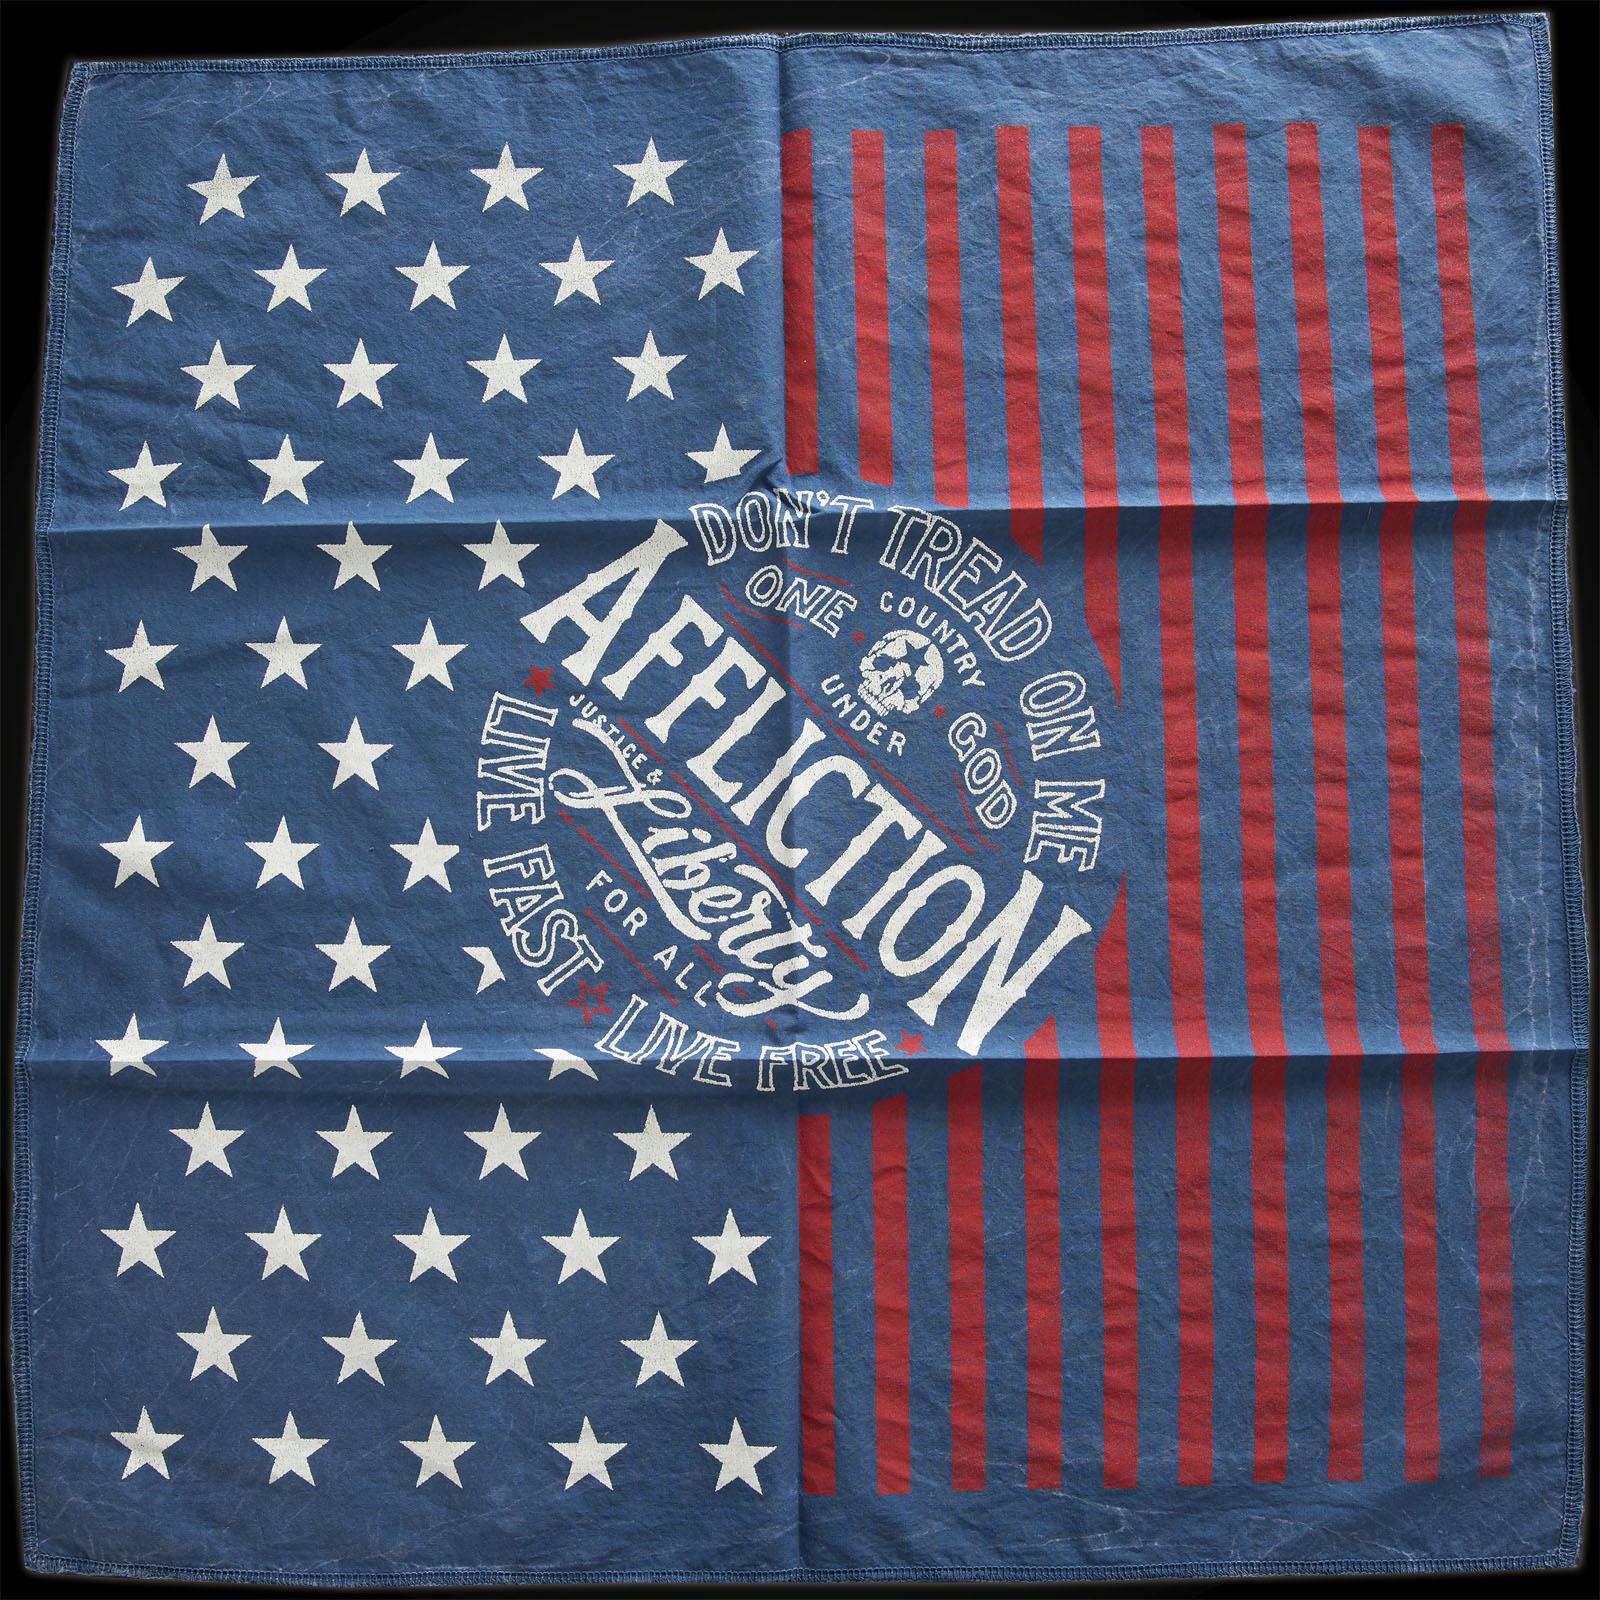 Affliction Bandana Liberty For All with a vintage car